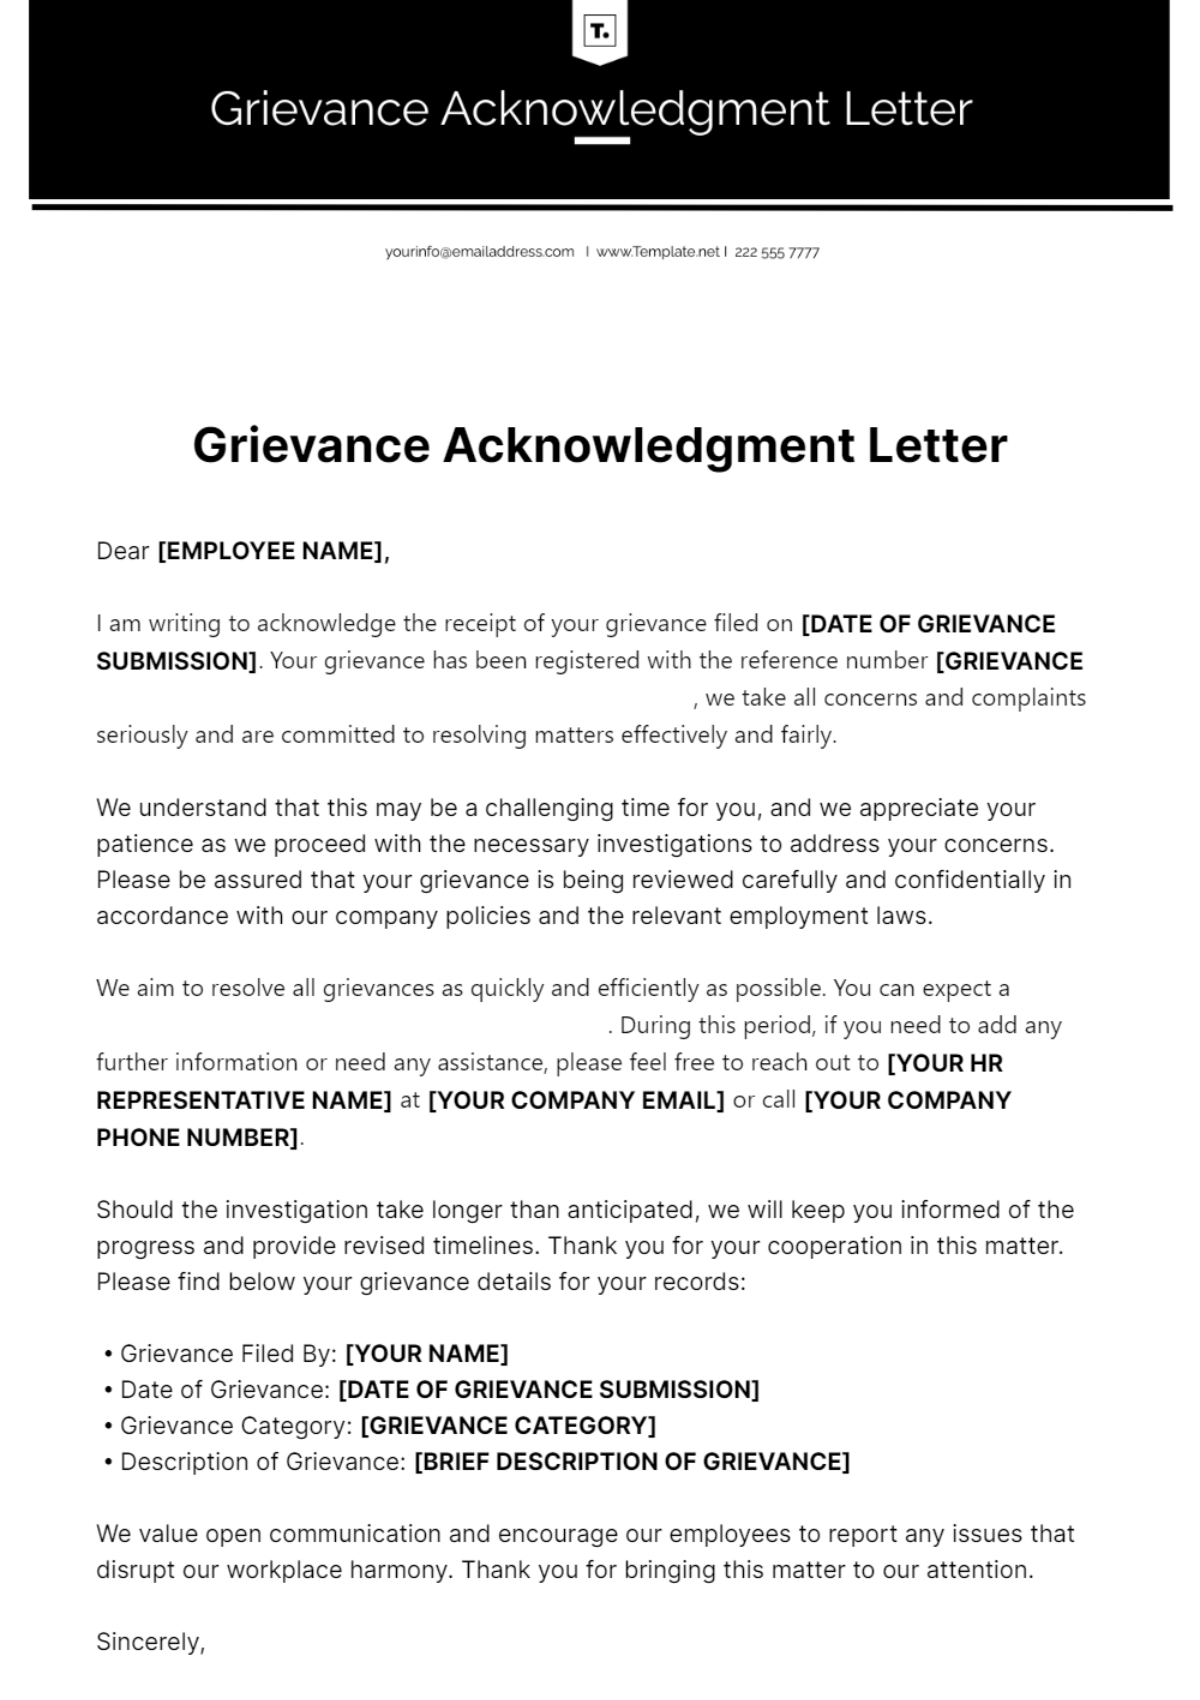 Grievance Acknowledgment Letter Template